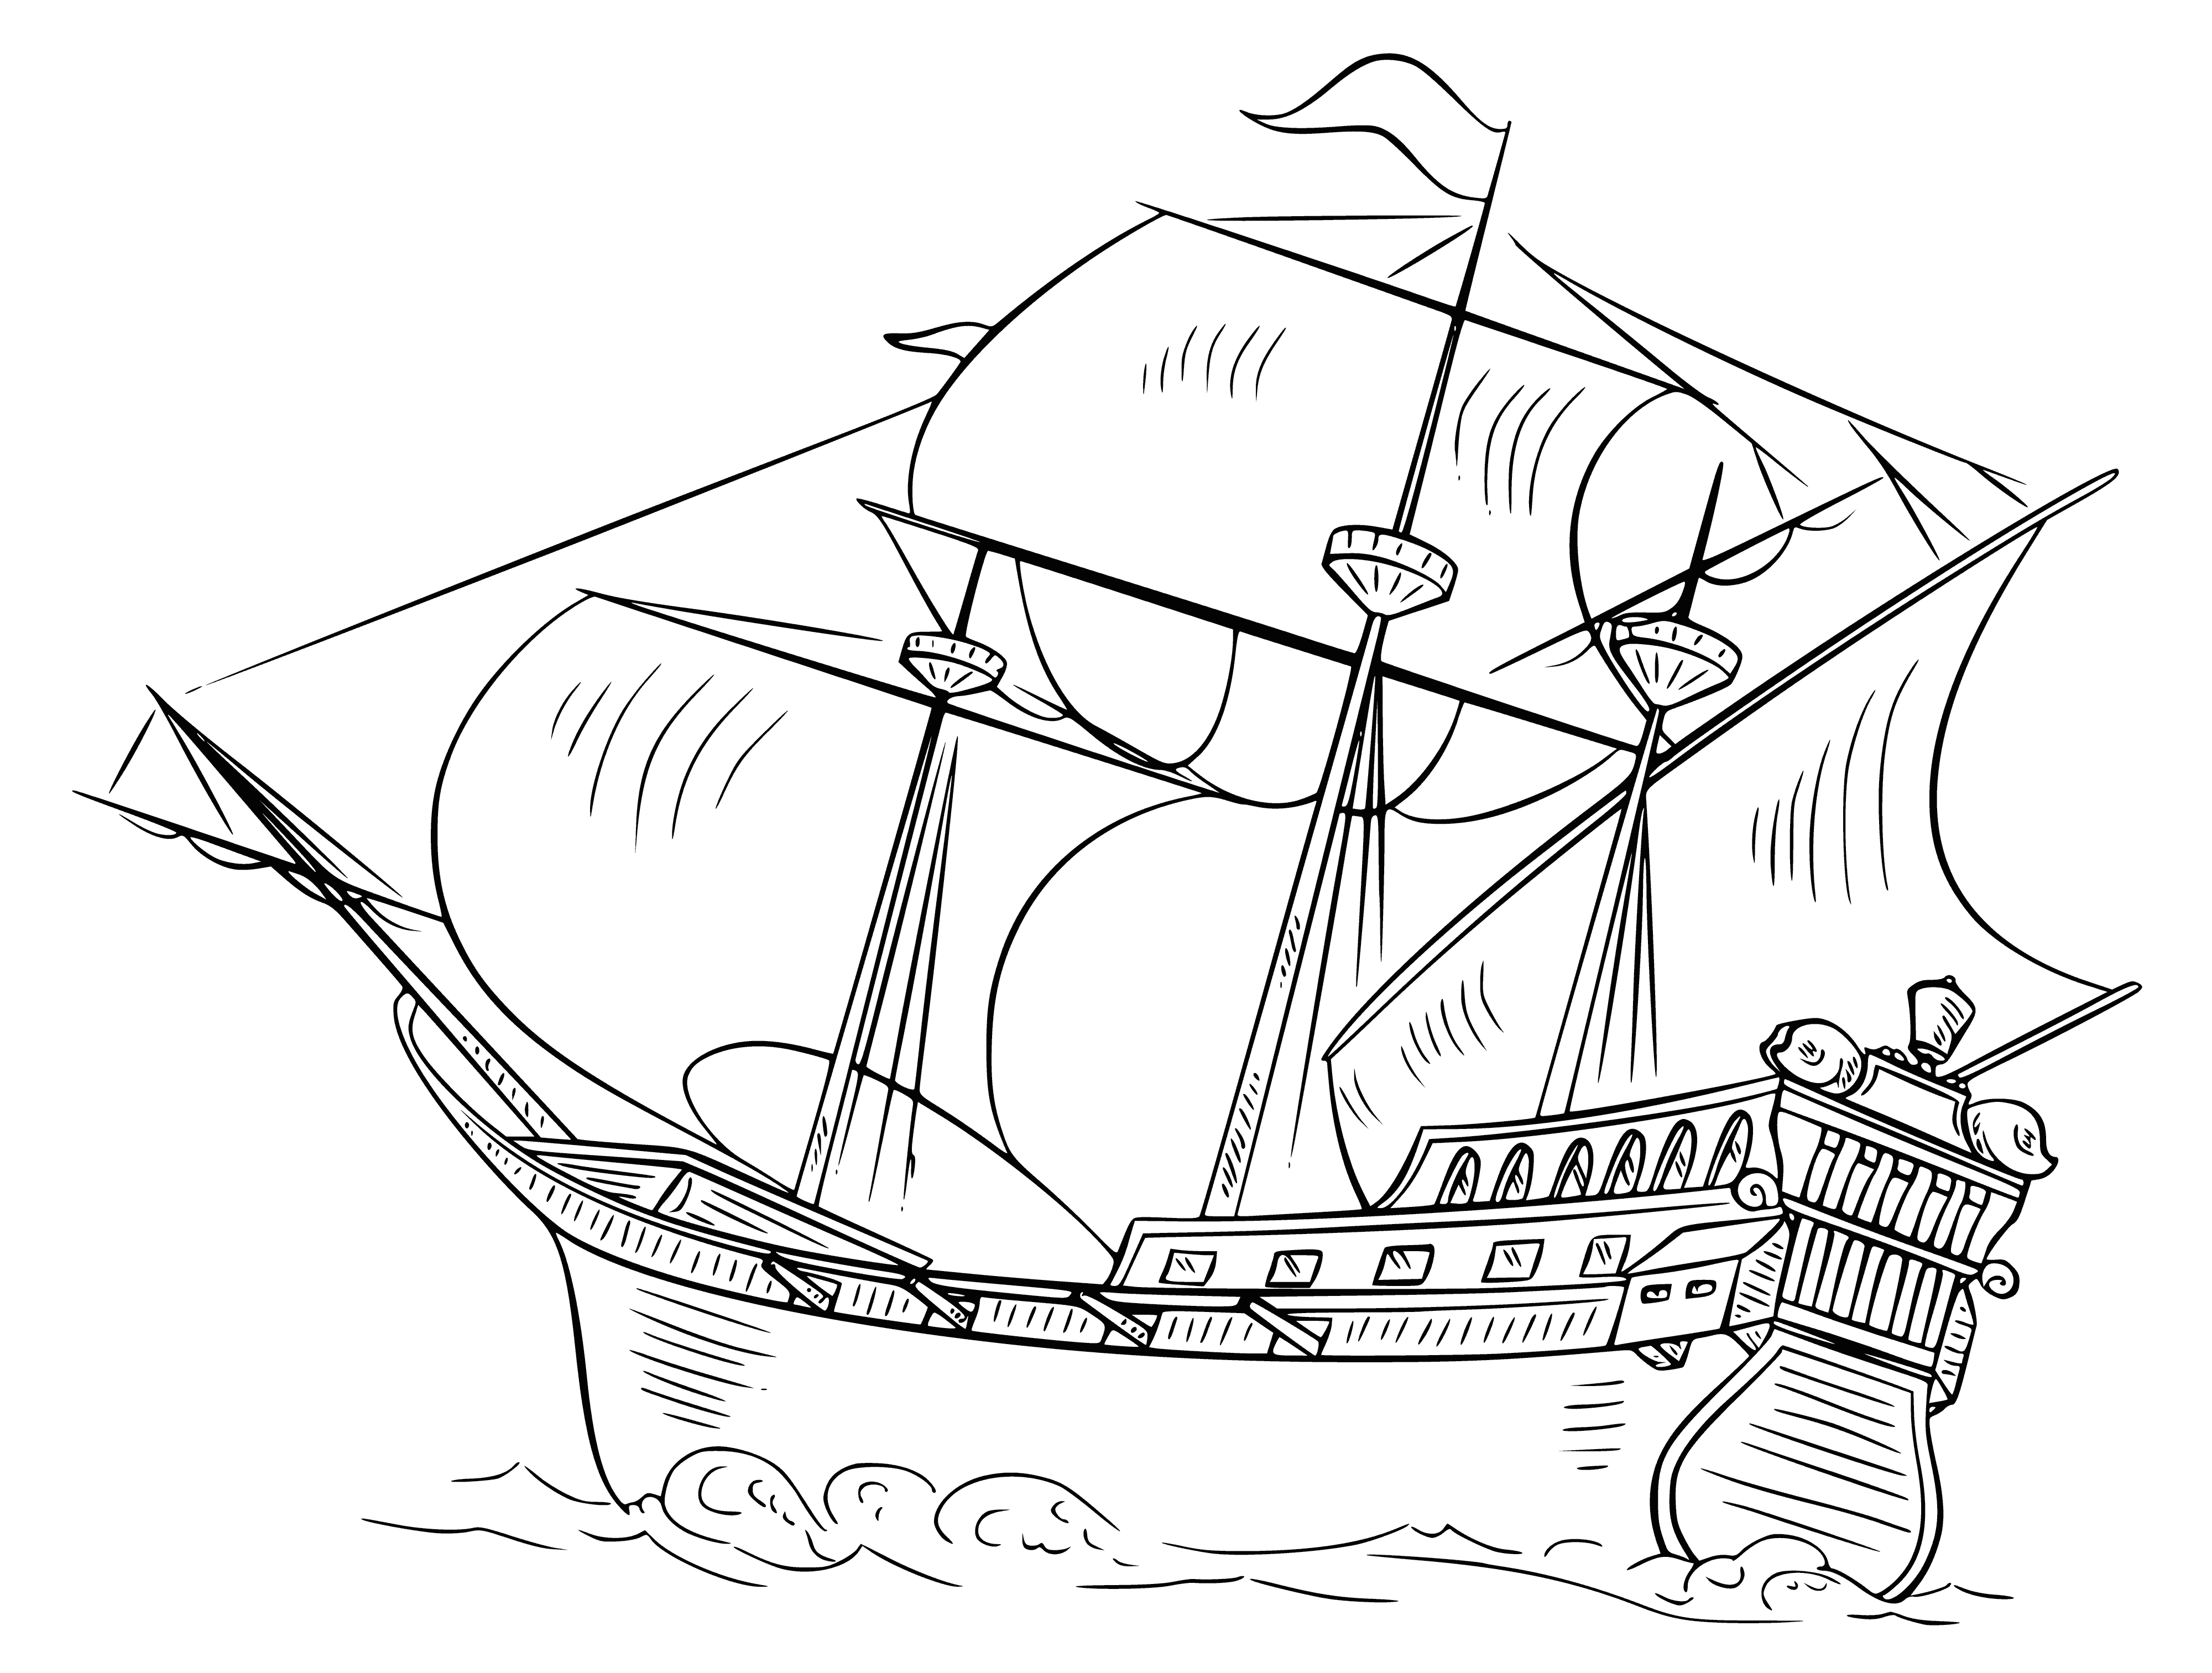 coloring page: Large 3-masted sailing ship. Gray hull, 2 decks, windows, 2 cargo holds & complex rigging w/many sails of different sizes.